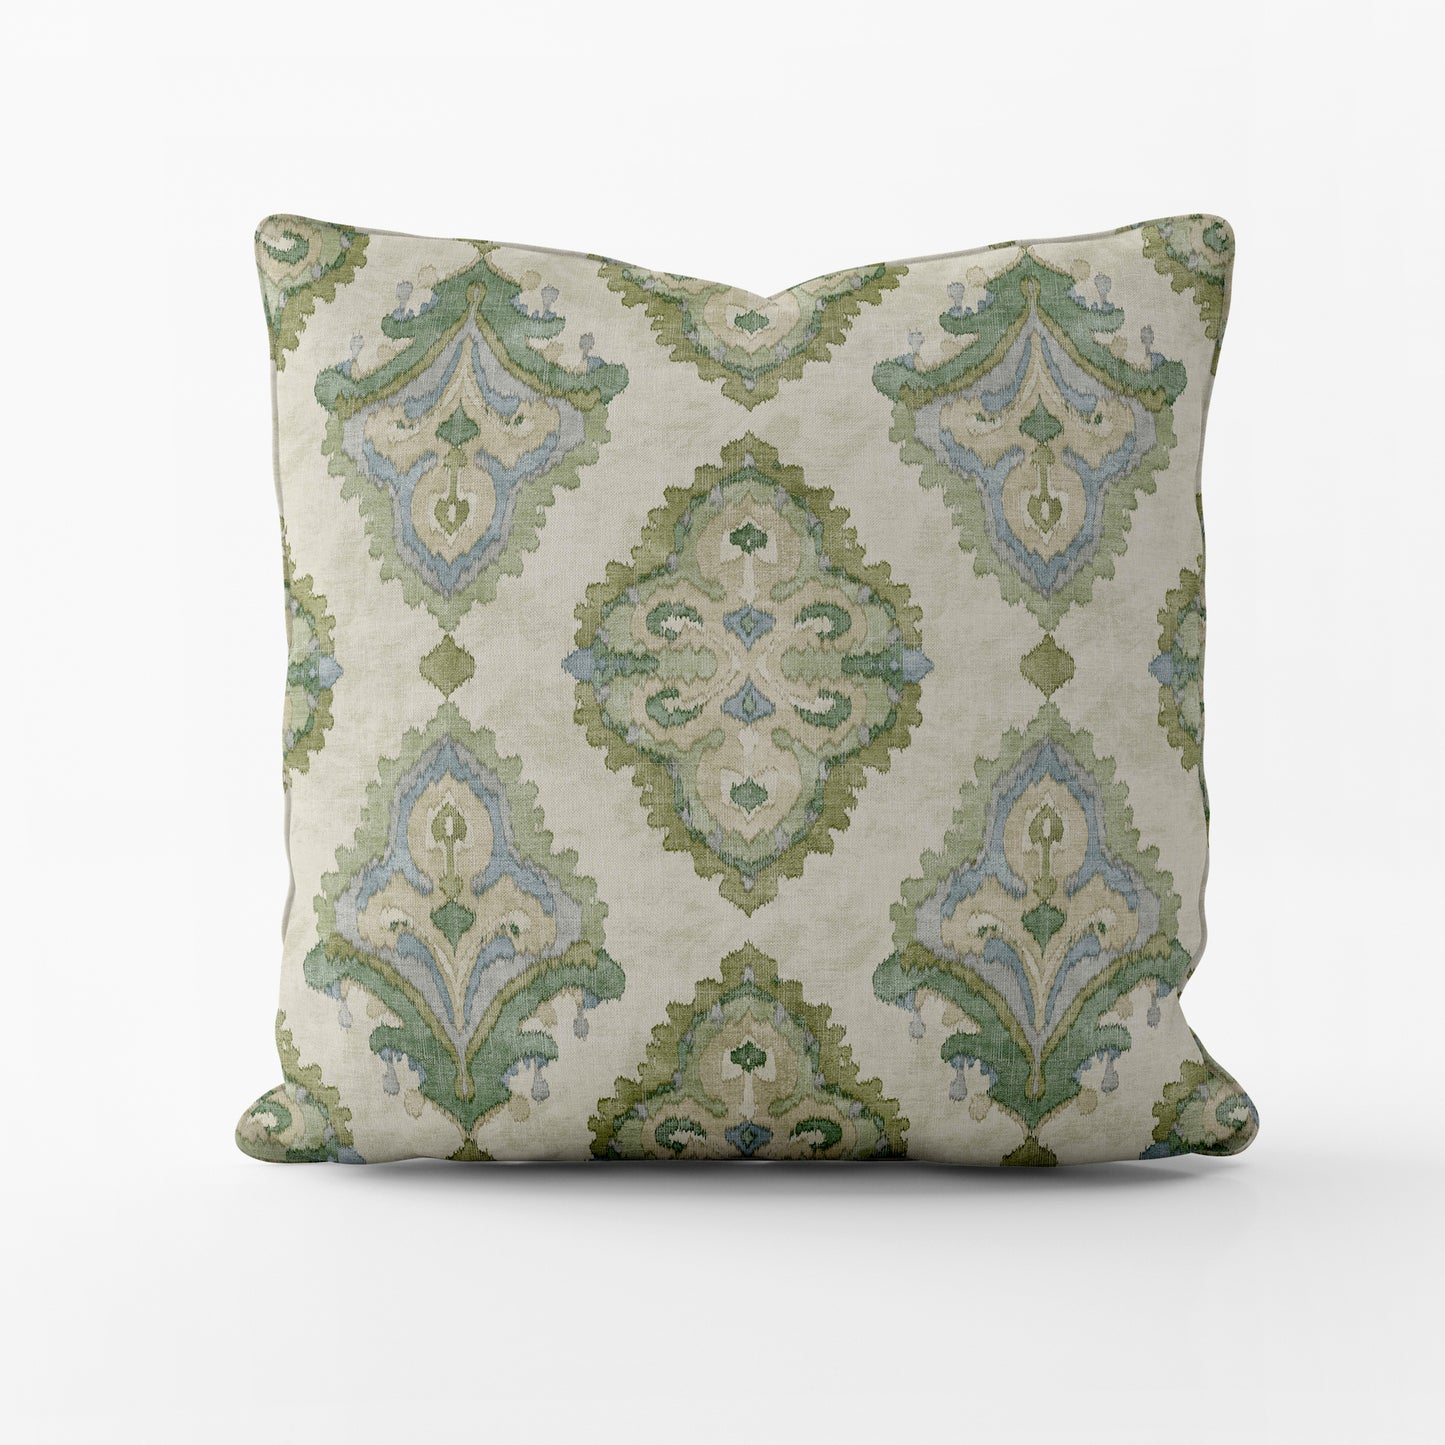 Decorative Pillows in Queen Bay Green, Blue Medallion Watercolor- Large Scale